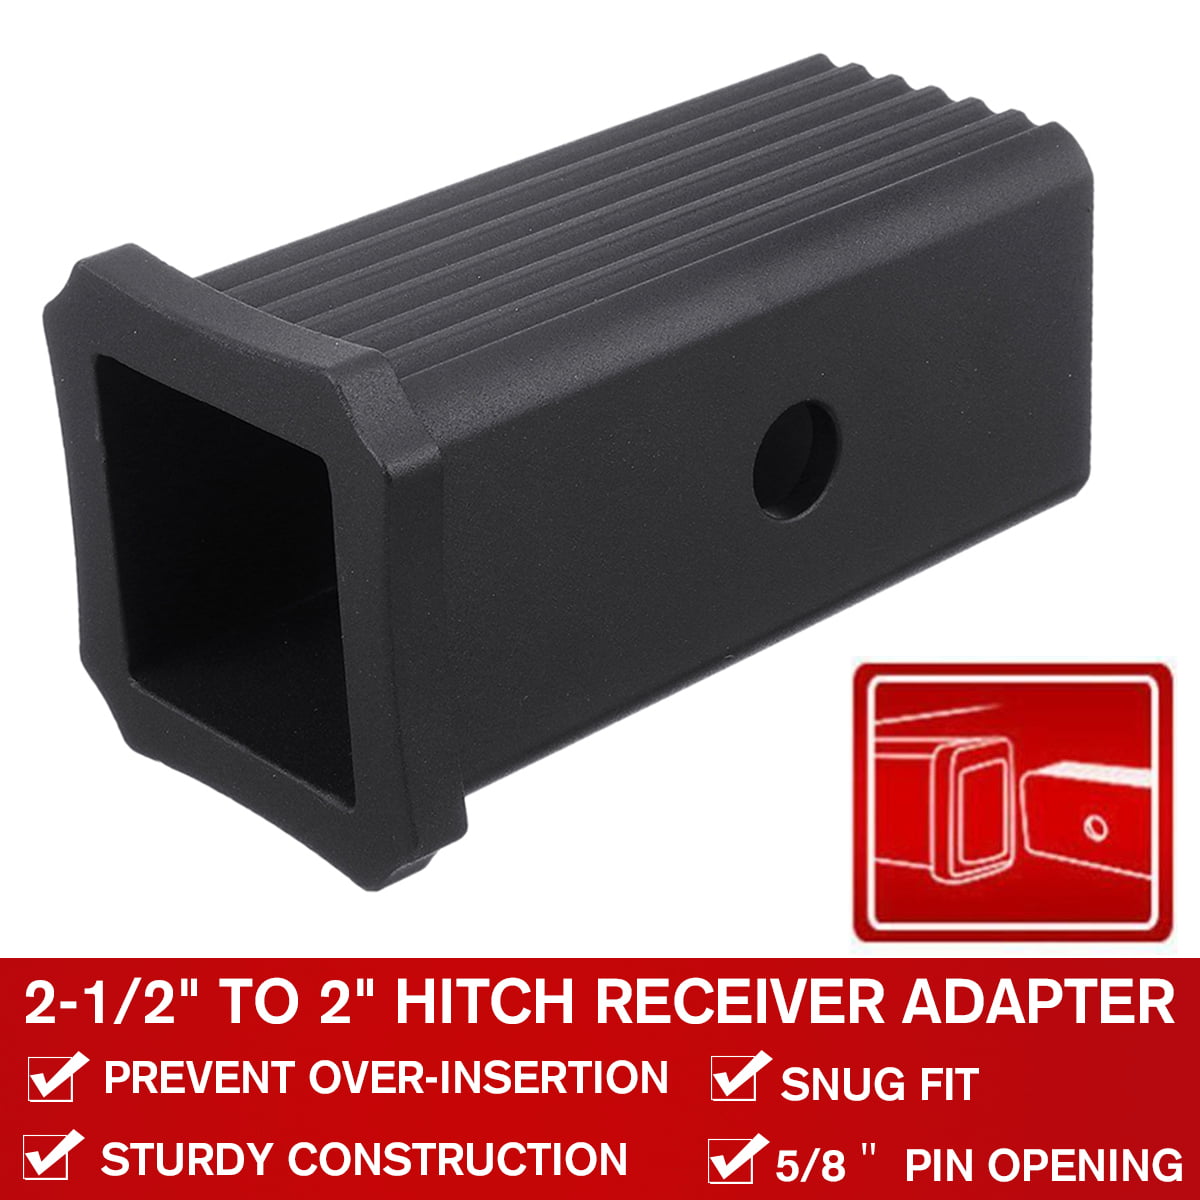 2-1/2 to 2" Adapter Hitch Receiver Sleeve Converter Reducer For RV Trailer Truck